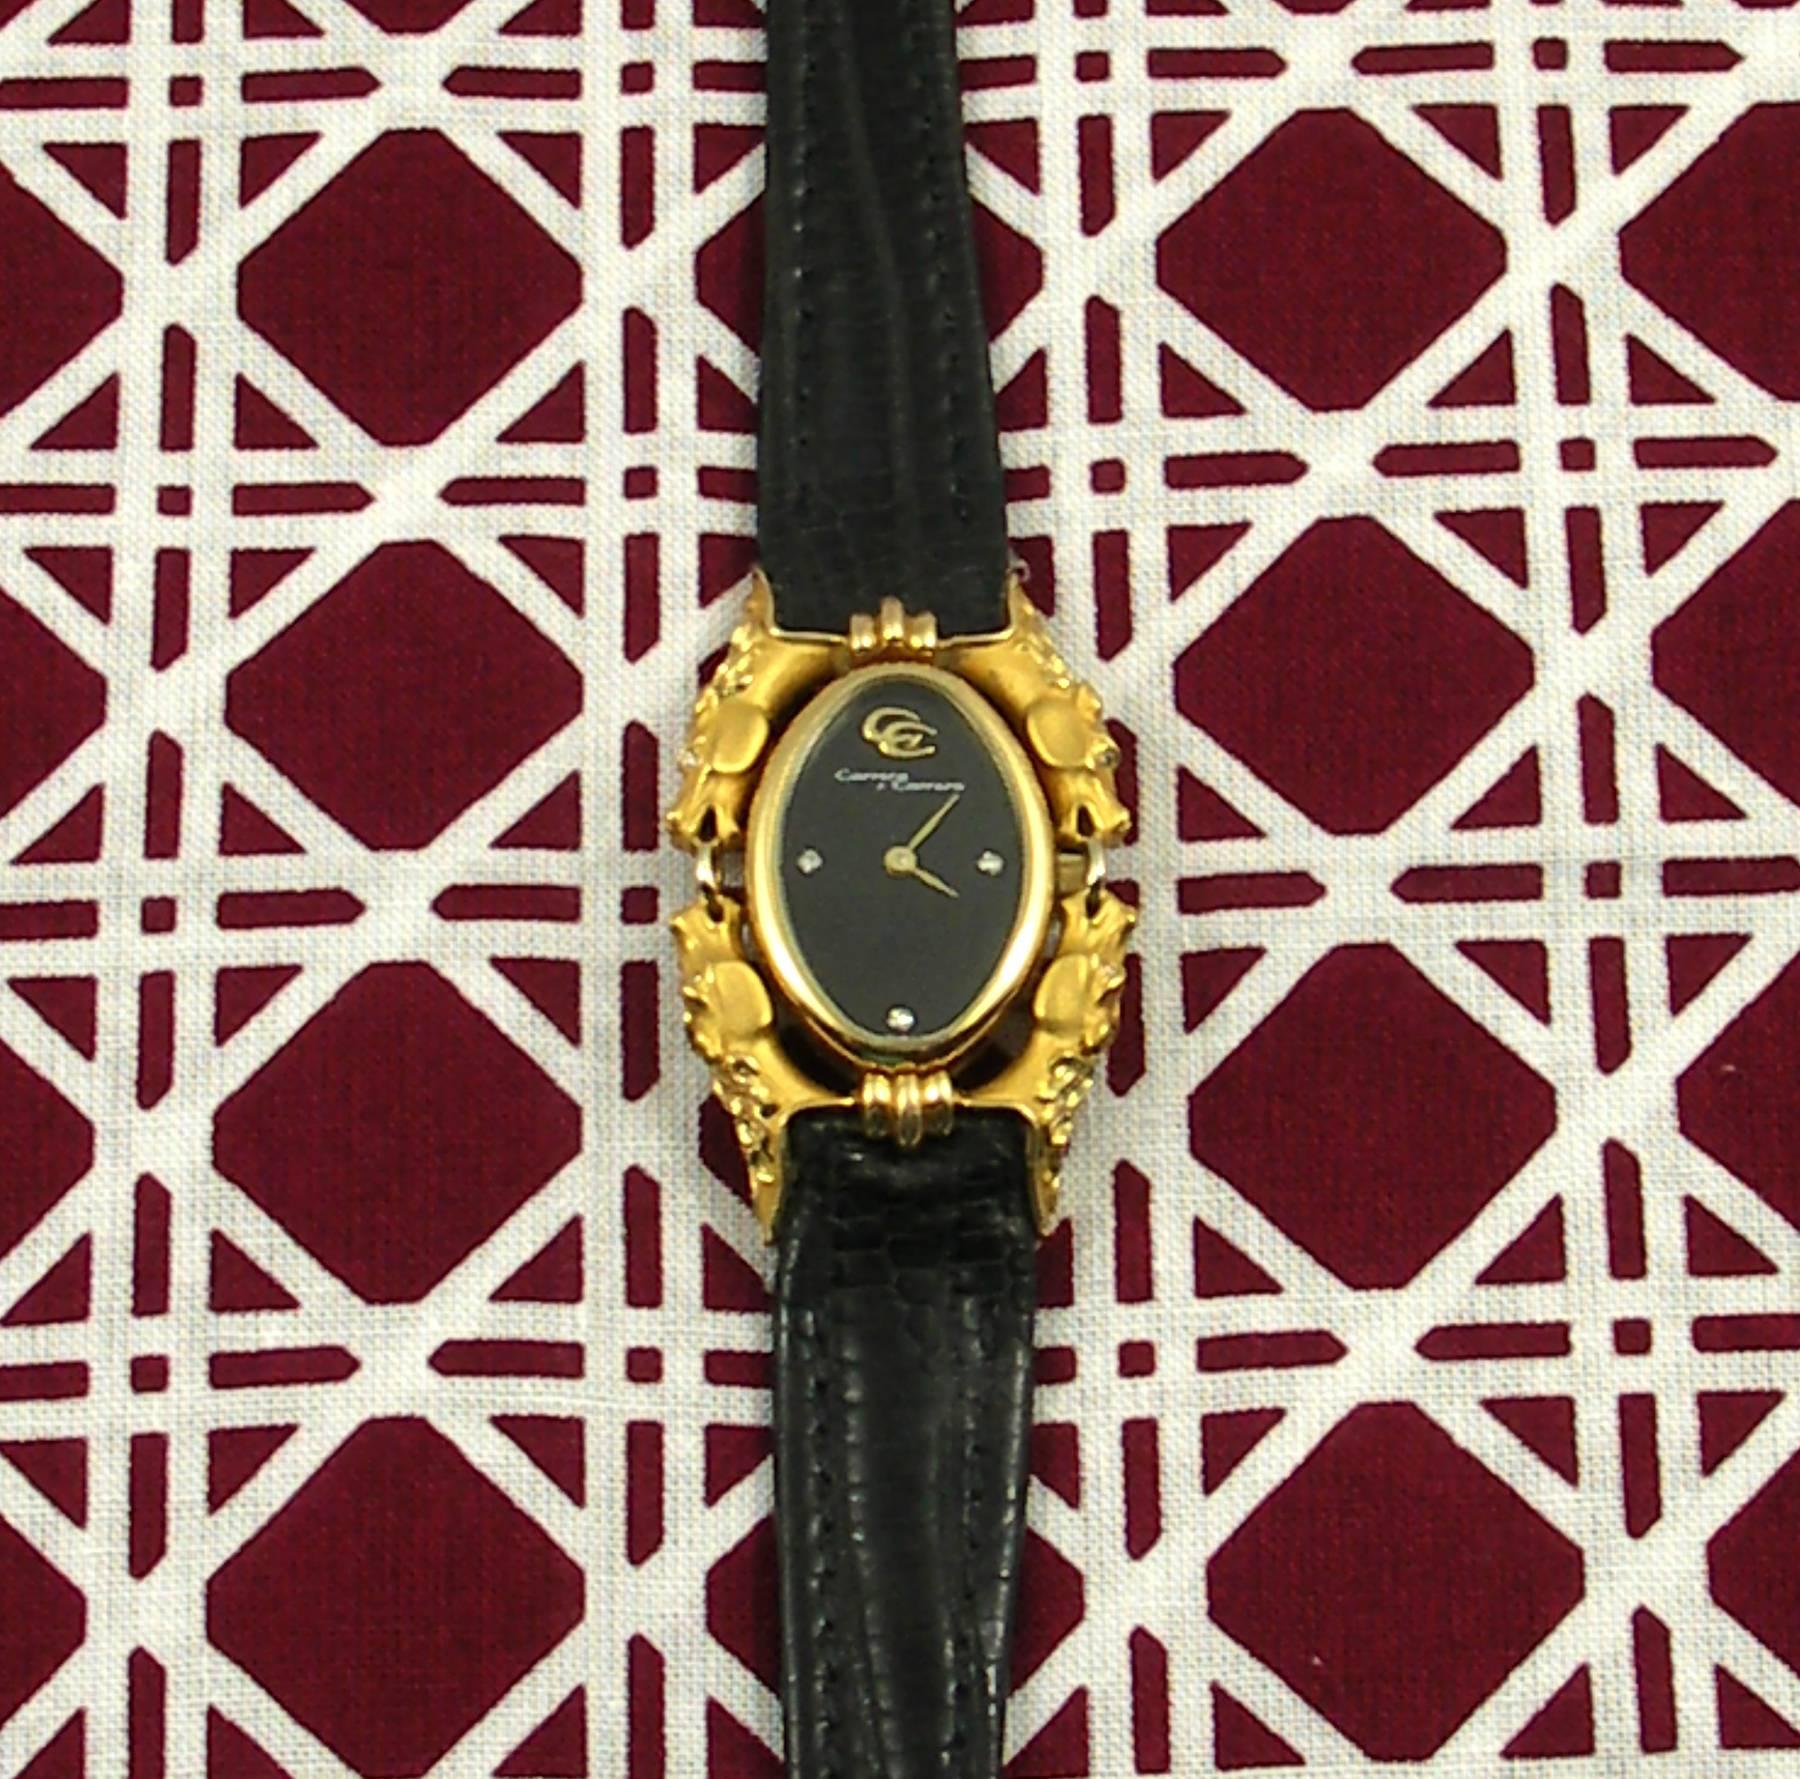 An 18K yellow gold ladies wristwatch by Carrera y Carrera, featuring horse heads on the four corners, set with diamond eyes. Adding to the sleek design is a black dial with diamond markers at the 3, 6, and 9 0'clock positions. This watch will